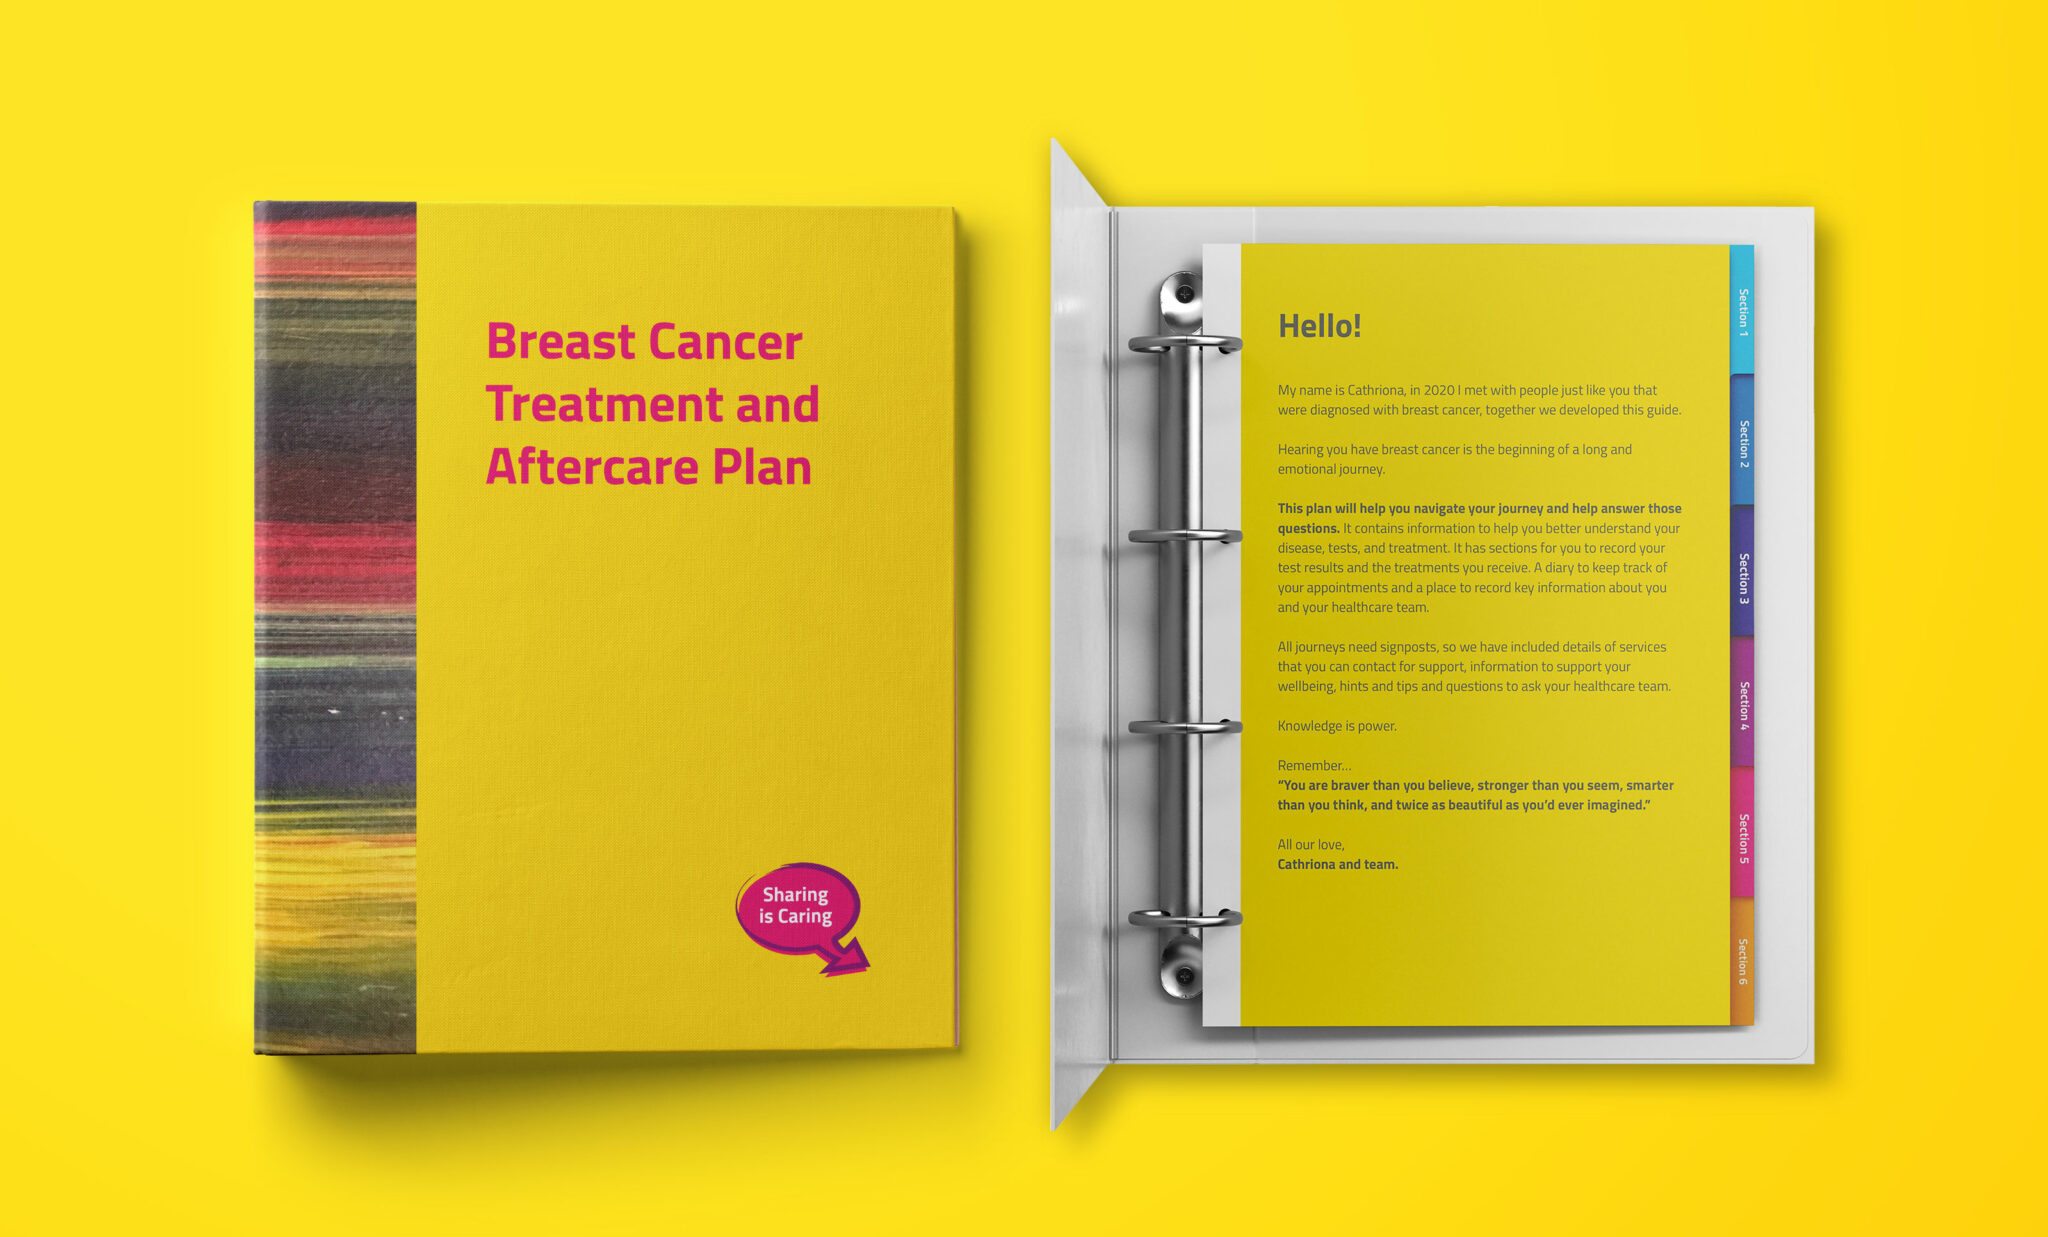 Breast Cancer Treatment and Aftercare Plan